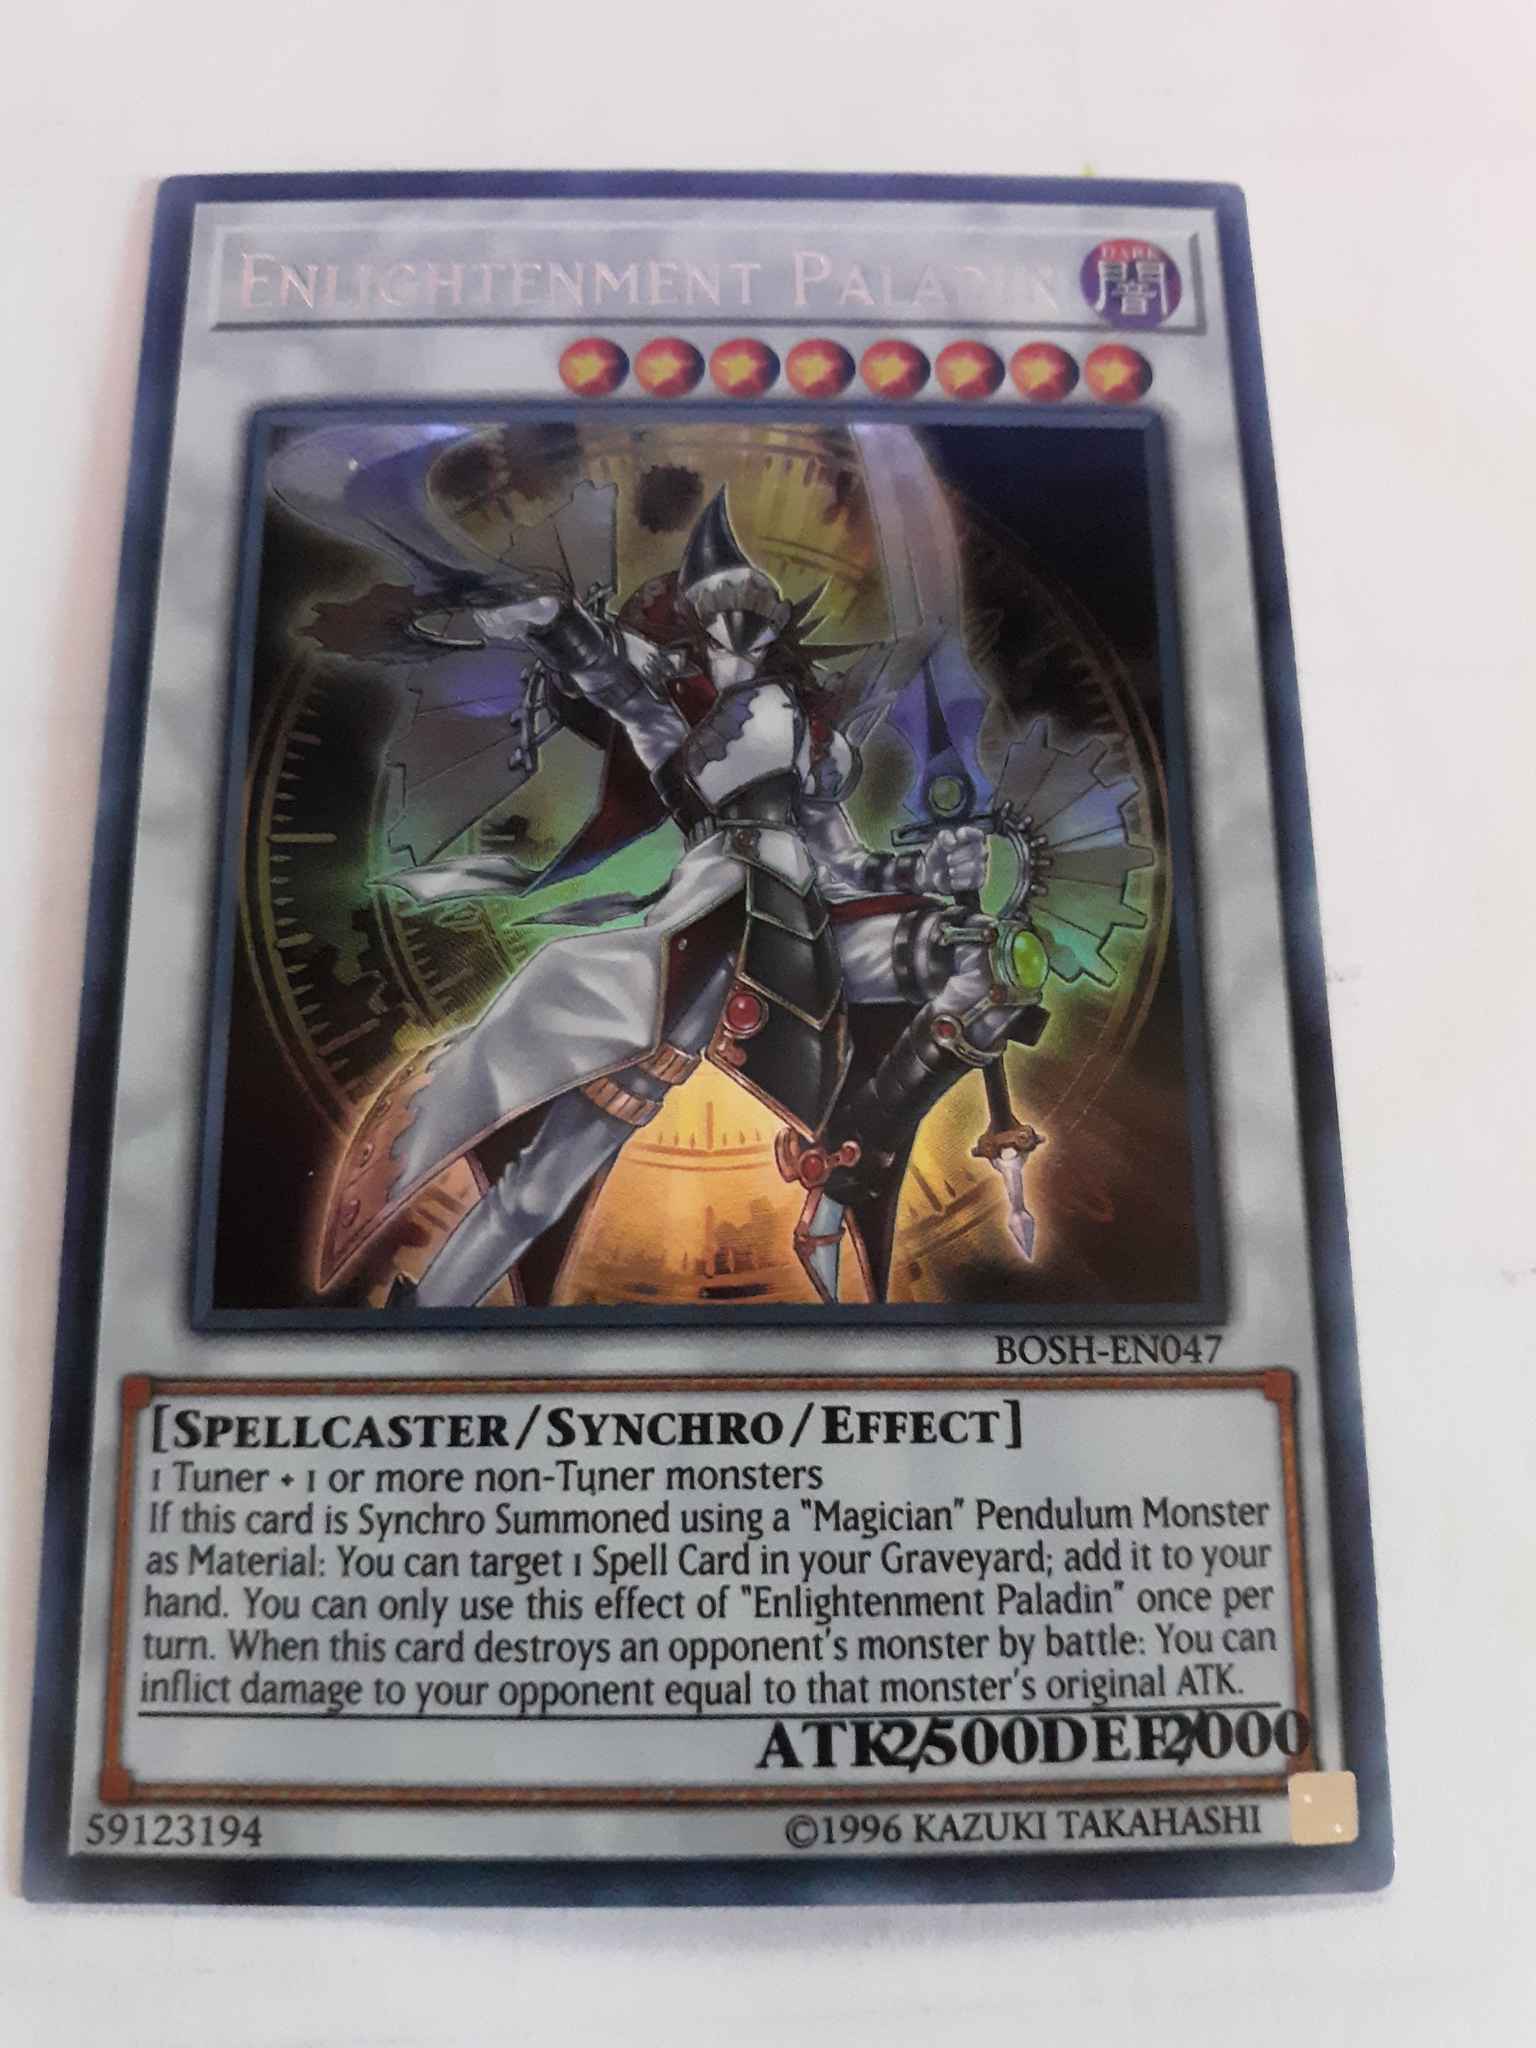 Enlightenment Paladin With Misprint Enlightenment Paladin Breakers Of Shadow Yugioh Online Gaming Store For Cards Miniatures Singles Packs Booster Boxes